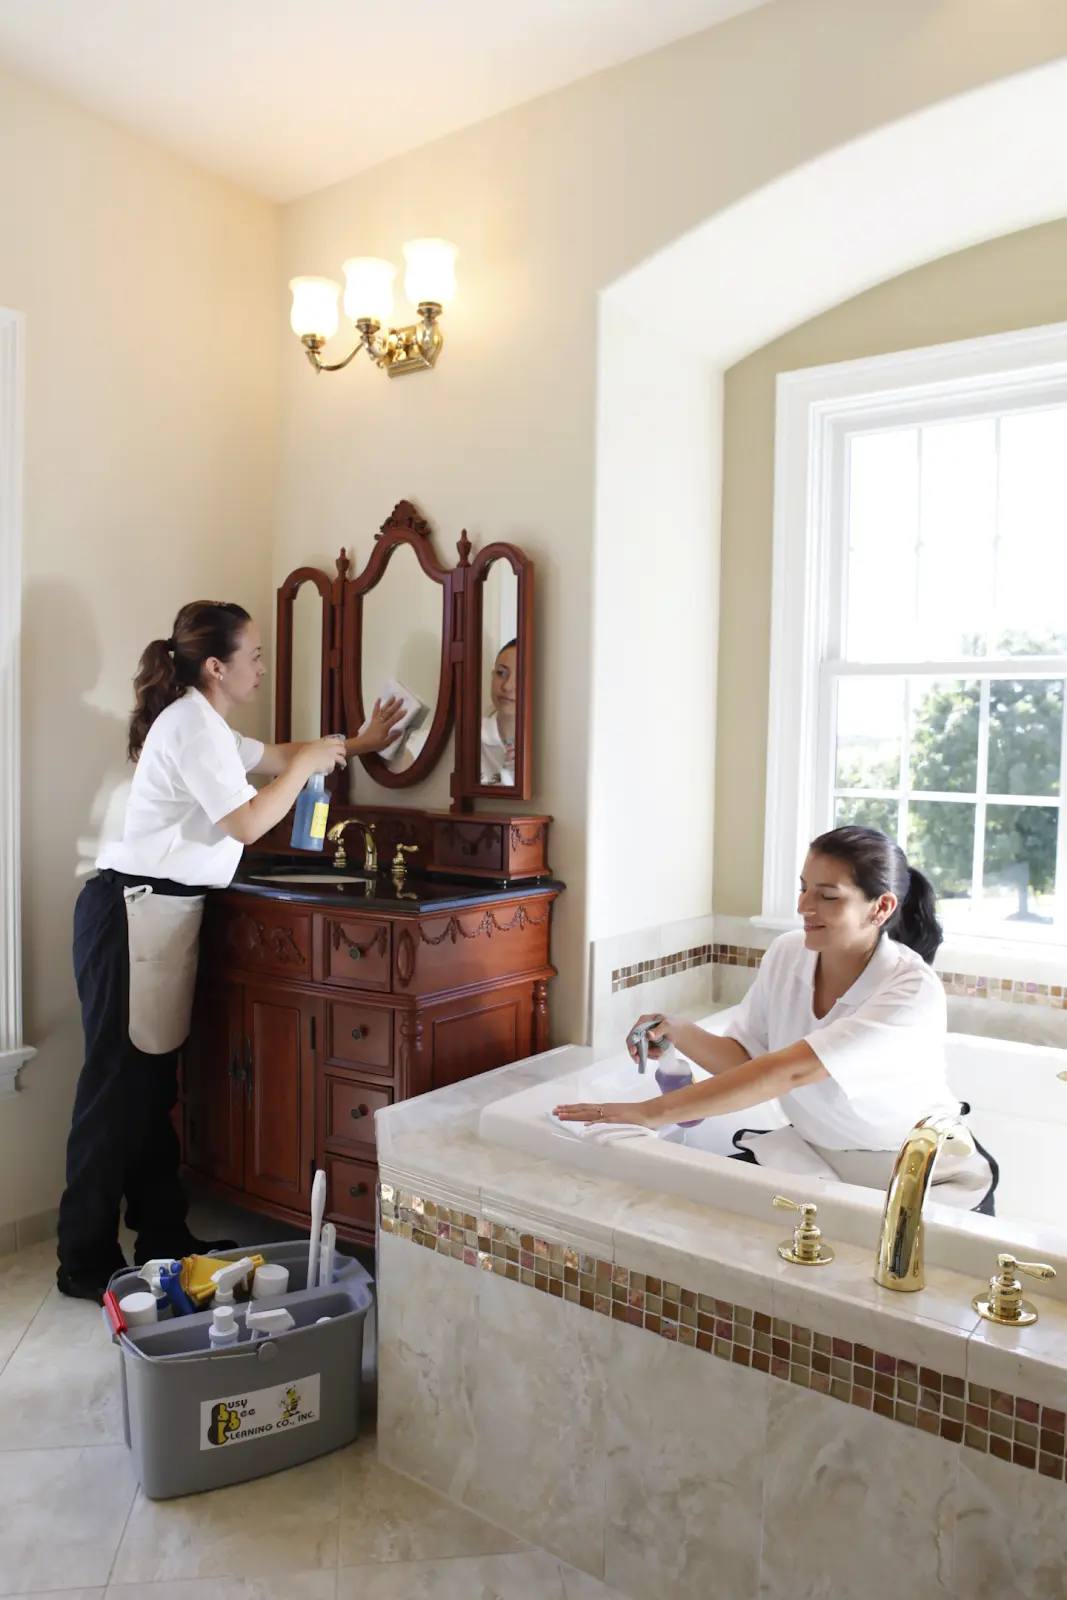  Busy Bee cleaners cleaning bathroom. Busy Bee Cleaning Company: Trusted Chester County Cleaning Services